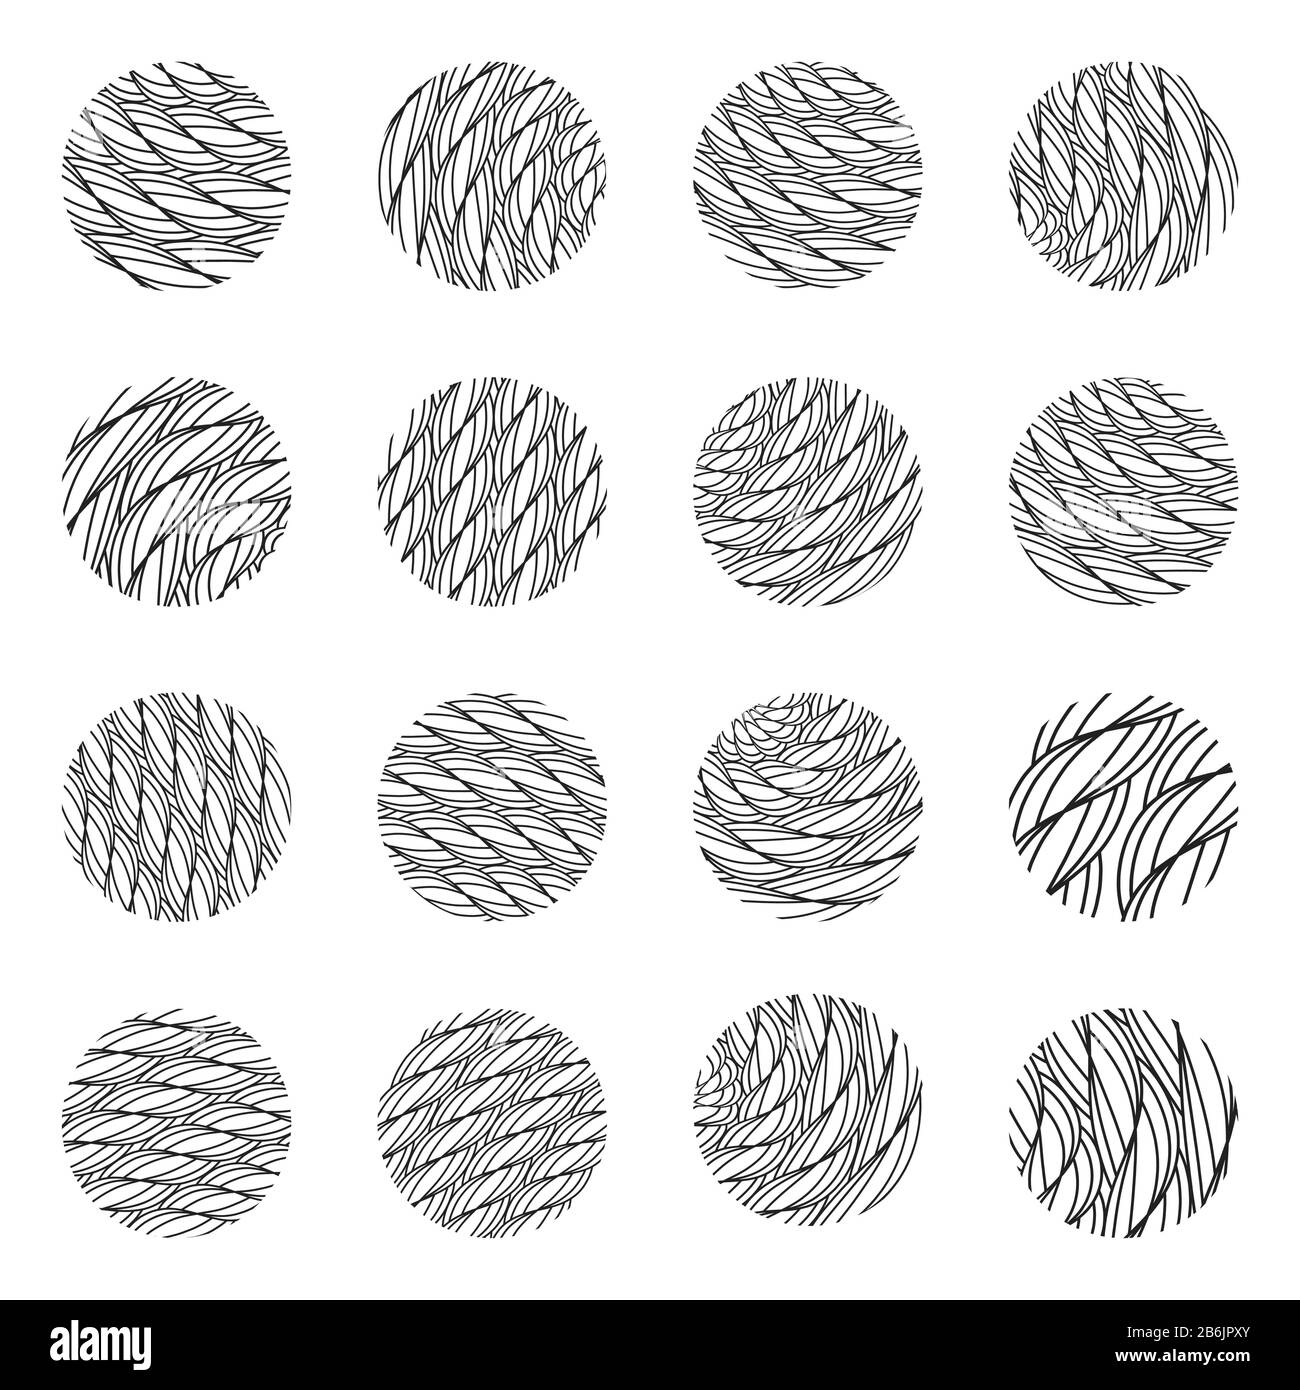 Vector outline rope design elements. Twisted rope patterns. Stock Vector